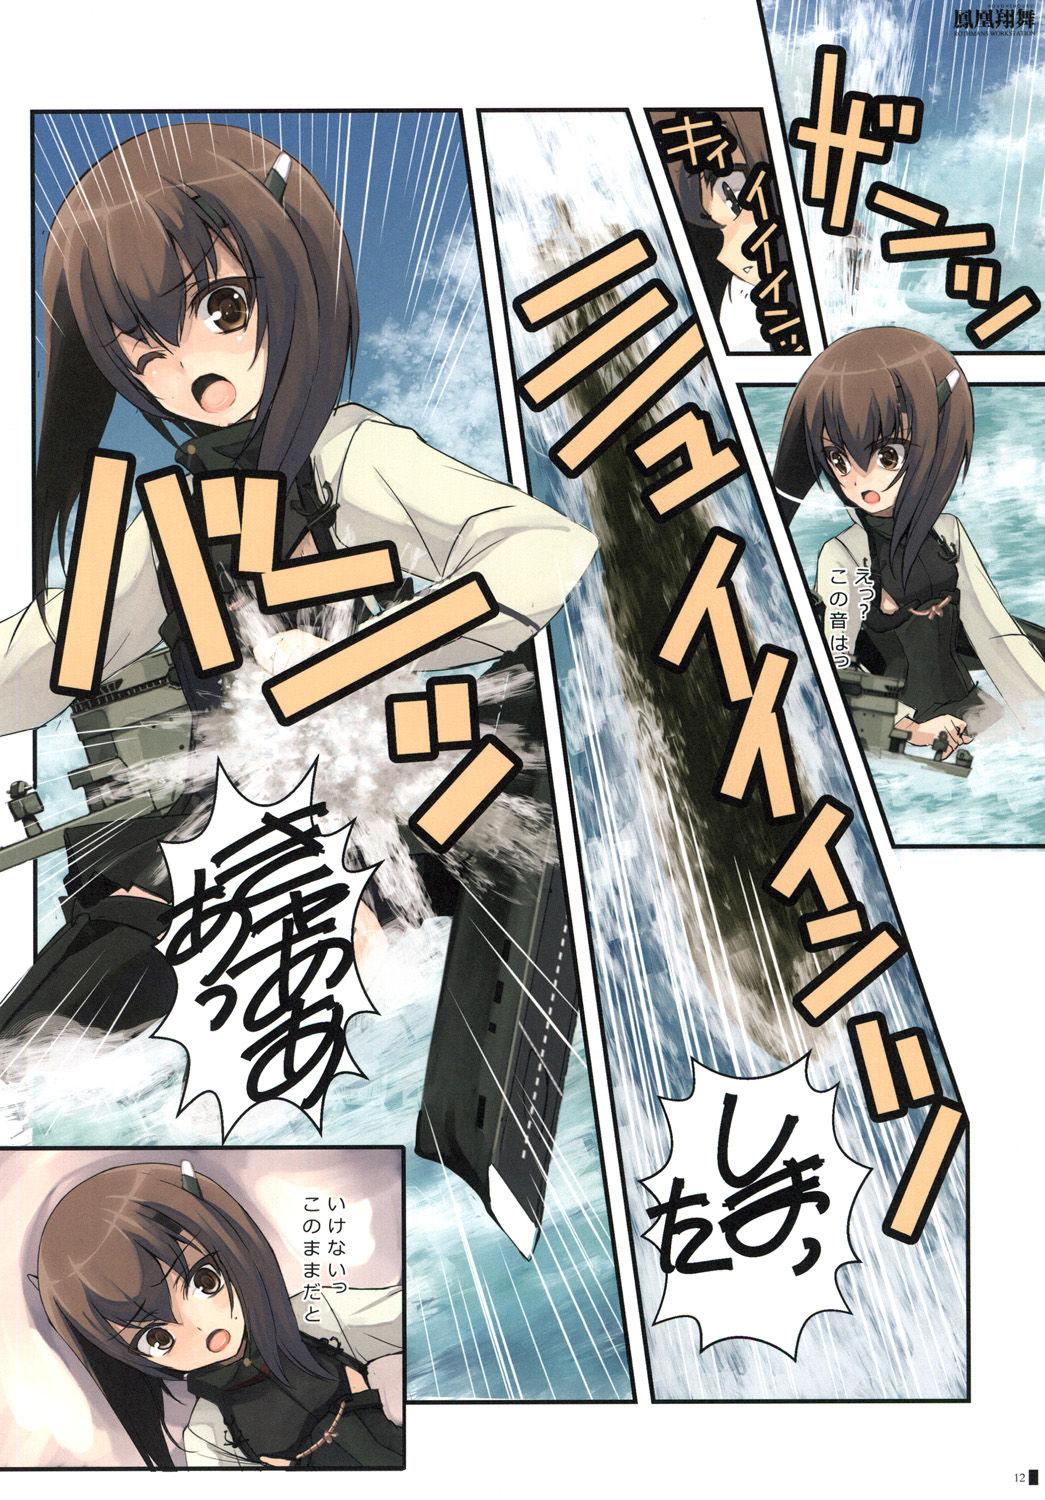 Jeans Houohshoubu - Kantai collection Whipping - Page 11